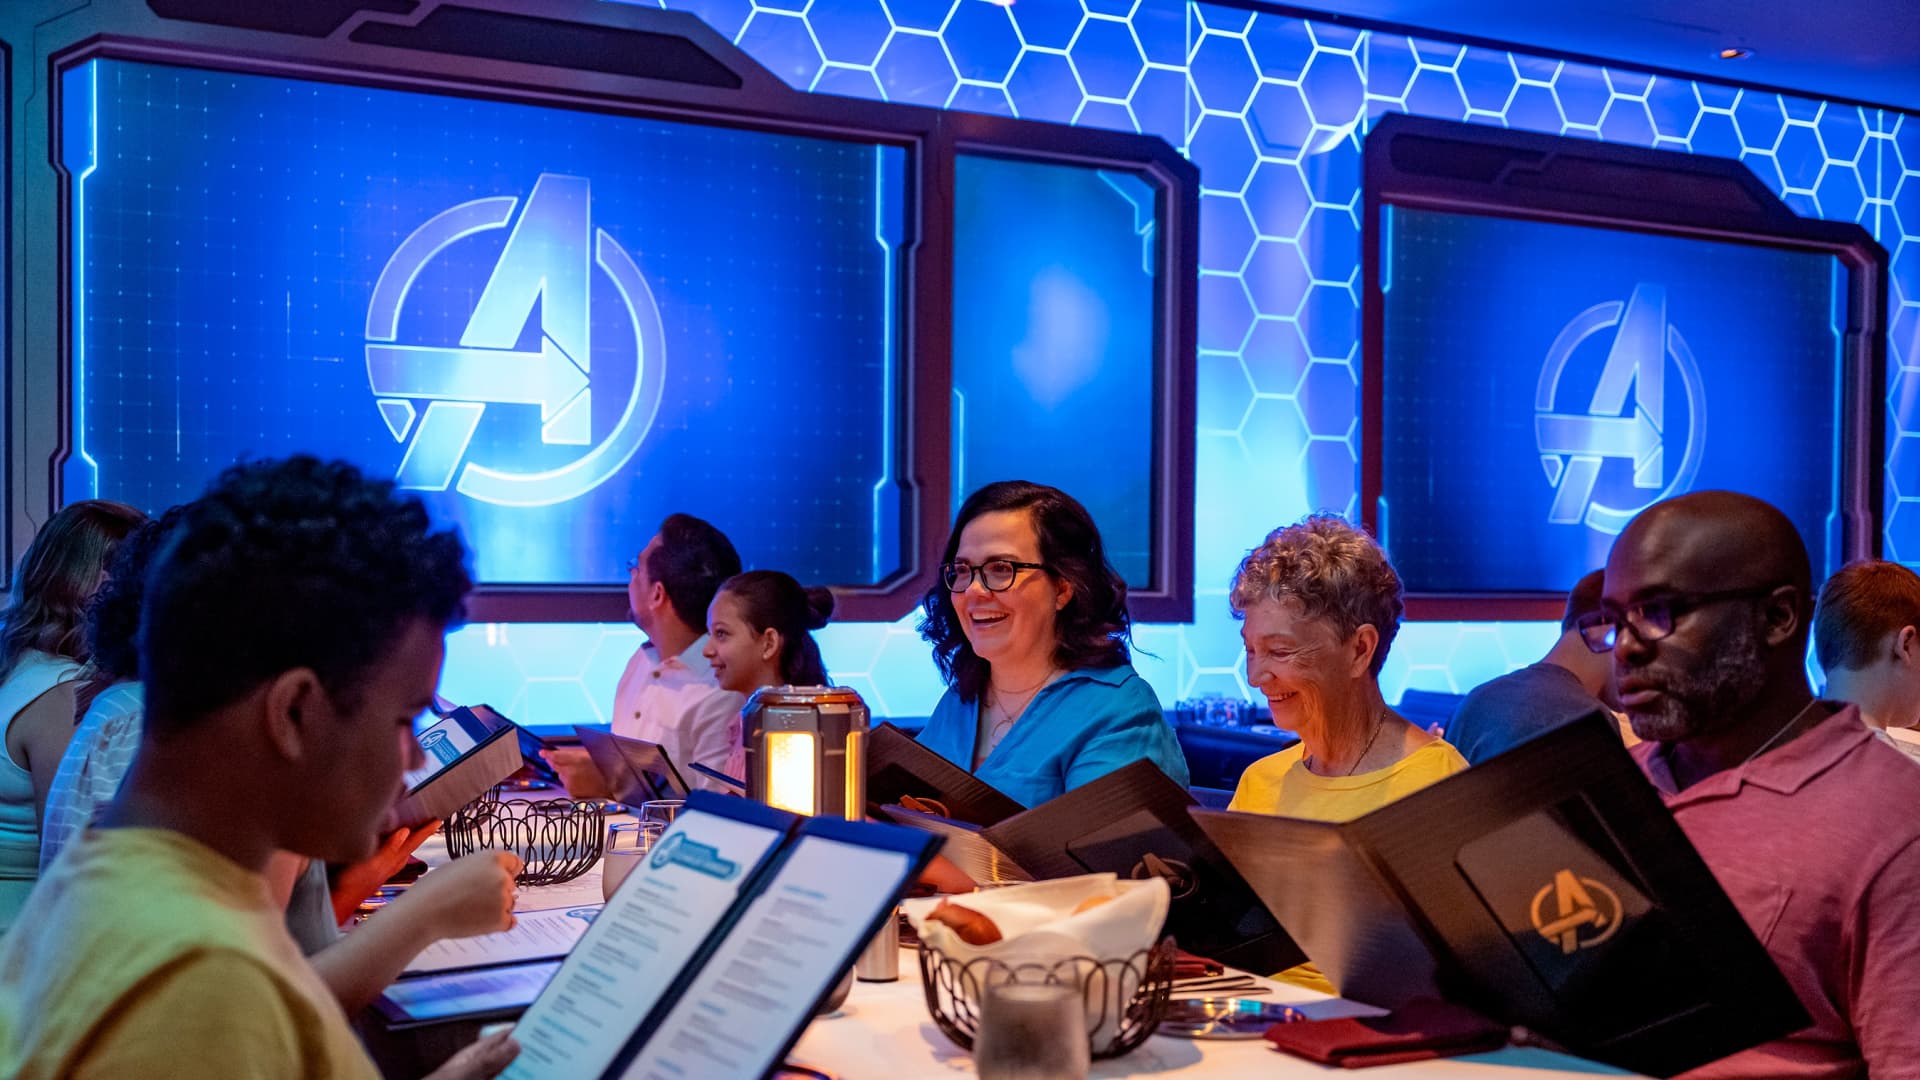 Worlds of Marvel is the first-ever Marvel cinematic dining adventure, where guests play an interactive role in an action-packed Avengers mission that unfolds around them, complete with a worldly menu inspired by the Marvel Cinematic Universe.